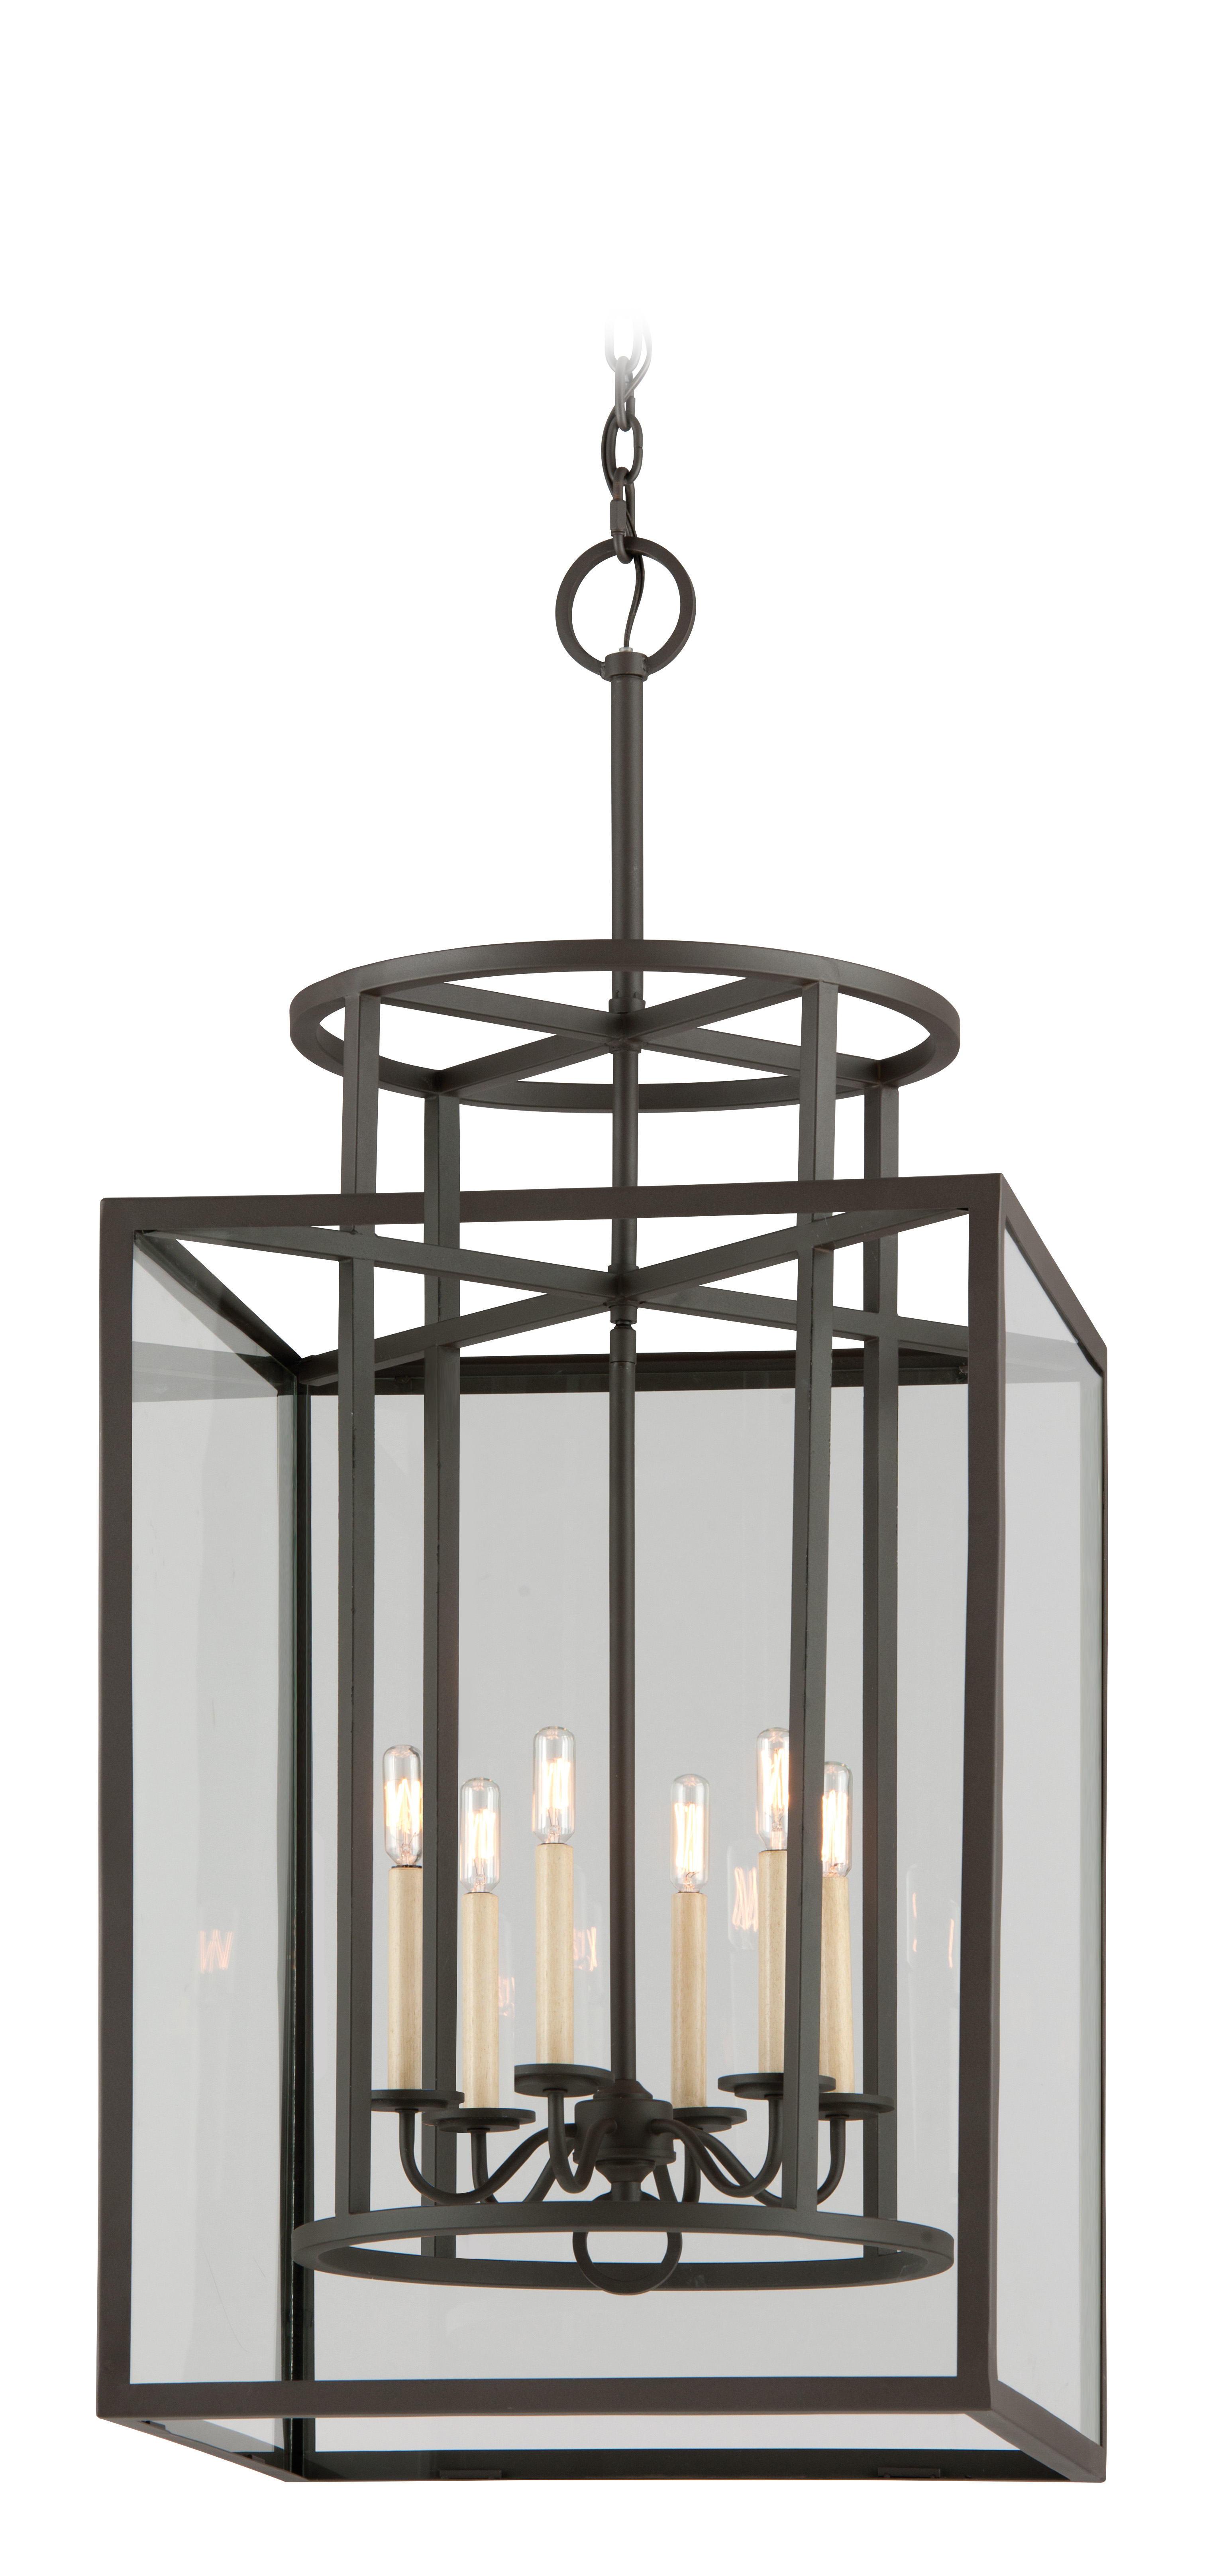 Maddox by Troy Lighting - Maddox combines clean lines and shapes to create a unique, industrial form. The bold fixture is constructed of hand-worked iron finished in a dark textured bronze.